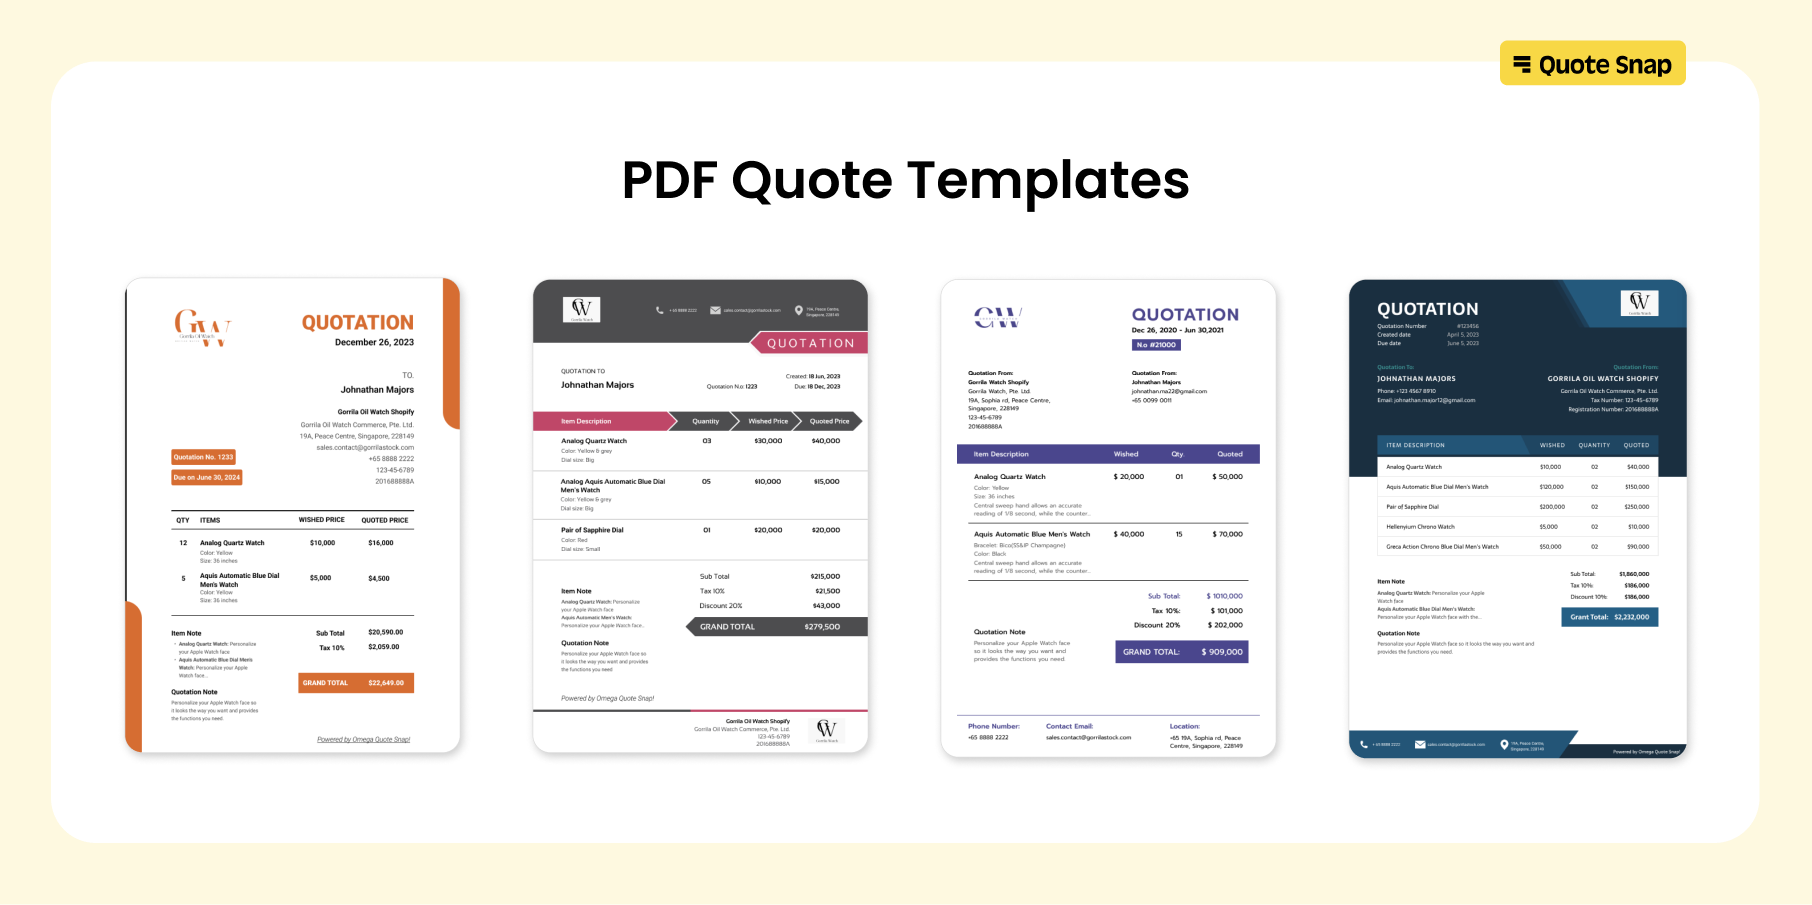 Get more transactional email templates in Quote Snap